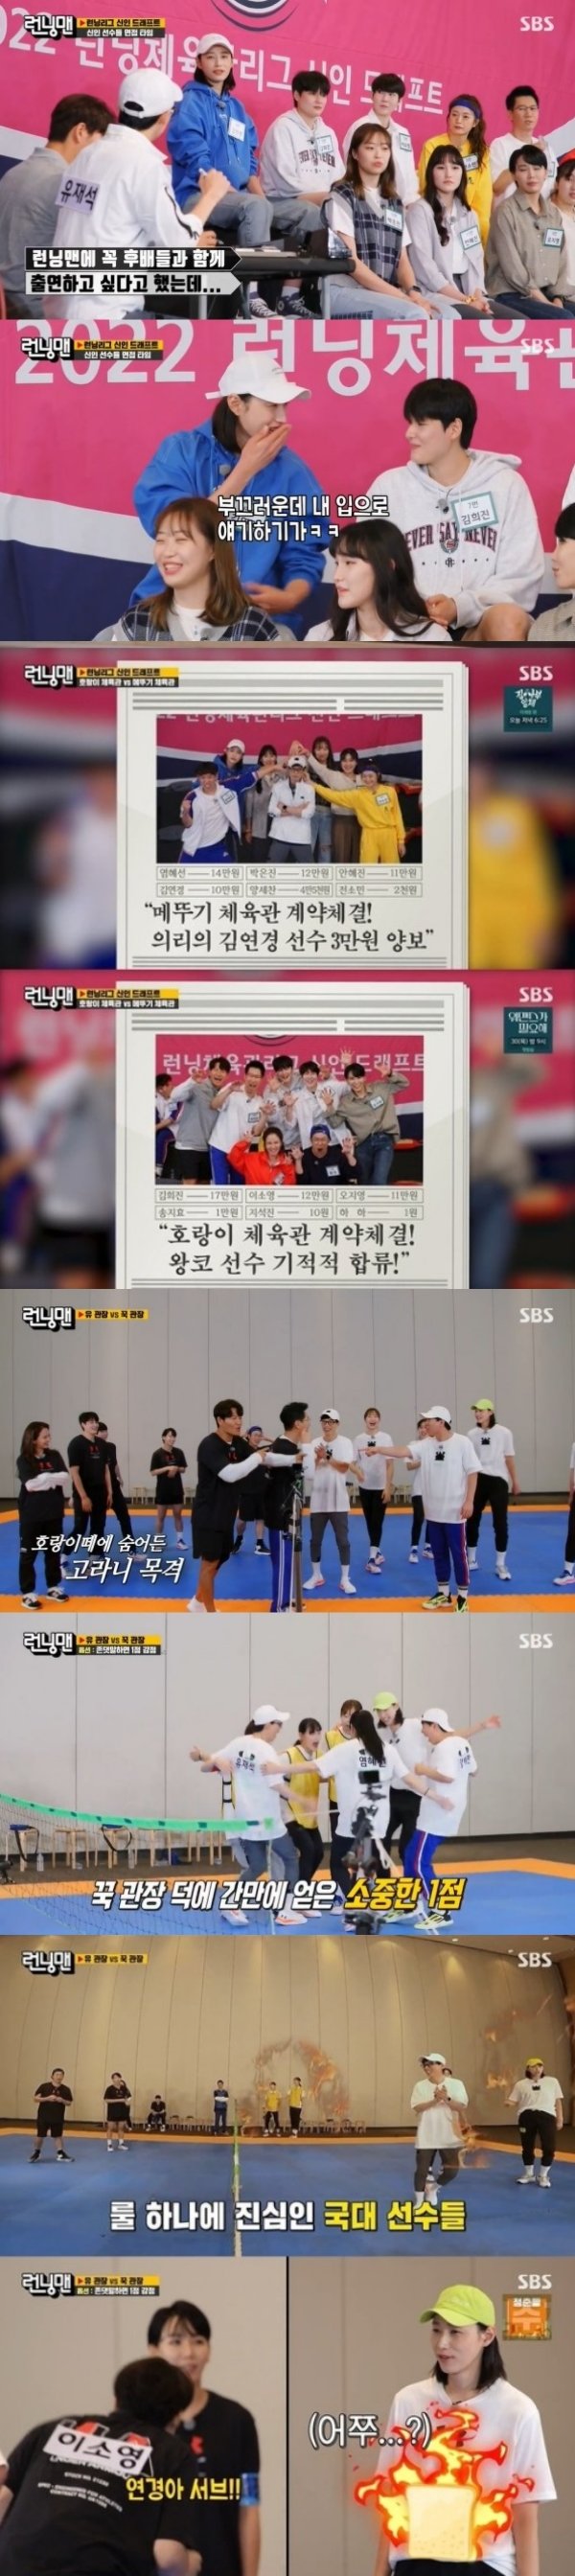 Running Man, which aired on the 26th, recorded TV viewer ratings of 6.3% (hereinafter based on Nielsen Korea Seoul Capital Area).The main indicator and target indicator of advertisers, 2049 TV viewer ratings, showed 4.2% (hereinafter based on Nielsen Korea Seoul Capital Area).Top TV viewer ratings per minute jumped to 9.4 per cent.The show was decorated with the UEFA Champions League rookie draft, and the womens volleyball team Kim Yeon-koung, Kim Hee-jin, Oh Ji-young, Yeum Hye-Seon, Park Eun-jin, Ahn Hye-jin and Lee So-young appeared The sun cheered everyone.Kim Yeon-koung said, I hear a lot of stories about Lee Kwang-soo, and I will fill the vacancy today.The draft, which consisted of a surprise progress by the caster, was made by Yoo Jae-Suk, who was reborn as the director according to the results of the race last week, along with Kim Jong-kook, the head of the Hung-Kwan.Kim Jong-kook had to negotiate Salary with the players with 990,000 One, Yoo Jae-Suk silver 1.3 million One, and the players had to have a volleyball before the draft and have to be evaluated by Choices for speed and playing.If Running Man members laughed, the volleyball team players showed off their ability to play well by showing fast spikes.Kim Hee-jin, who showed 70km / h, chose to go to the tiger gym at the top Salary 170,000 One, and Oh Ji Young, Lee So Young, Haha, Ji Suk-jin and Song Ji-hyo also joined.Kim Yeon-koung, 60km/h, offered his Salary 30,000 One to join Yang Se-chan to Choices the Grasshop Gym.Park Eun-jin, Yeum Hye-Seon, Ahn Hye-jin and Jeon So-min also headed to the grasshopper gym.The first Battle was a football: a hand-held Libero, with both teams Choices Haha and Kim Yeon-koung and added tension to the intense rally from the start.However, unexpected options Do not write honorific words emerged as a variable, and Kim Jong-kook and Yoo Jae-Suk, the two team managers, fell into Kim Jong-kook and Yoo Jae-Suk were reprimanded for each mistake, and each time they scored, they were tired of the energy of the players who showed that world tension and predicted a tough battle in the future.In particular, Kim Yeon-koung bombarded the nagging scene when Yoo Jae-Suk made a mistake with rib blocking, and the scene took the best one minute with 9.4% of the best TV viewer ratings per minute.Next weeks show will be followed by a fiery battle of both gymnasts with the final result of the foot volleyball Battle.